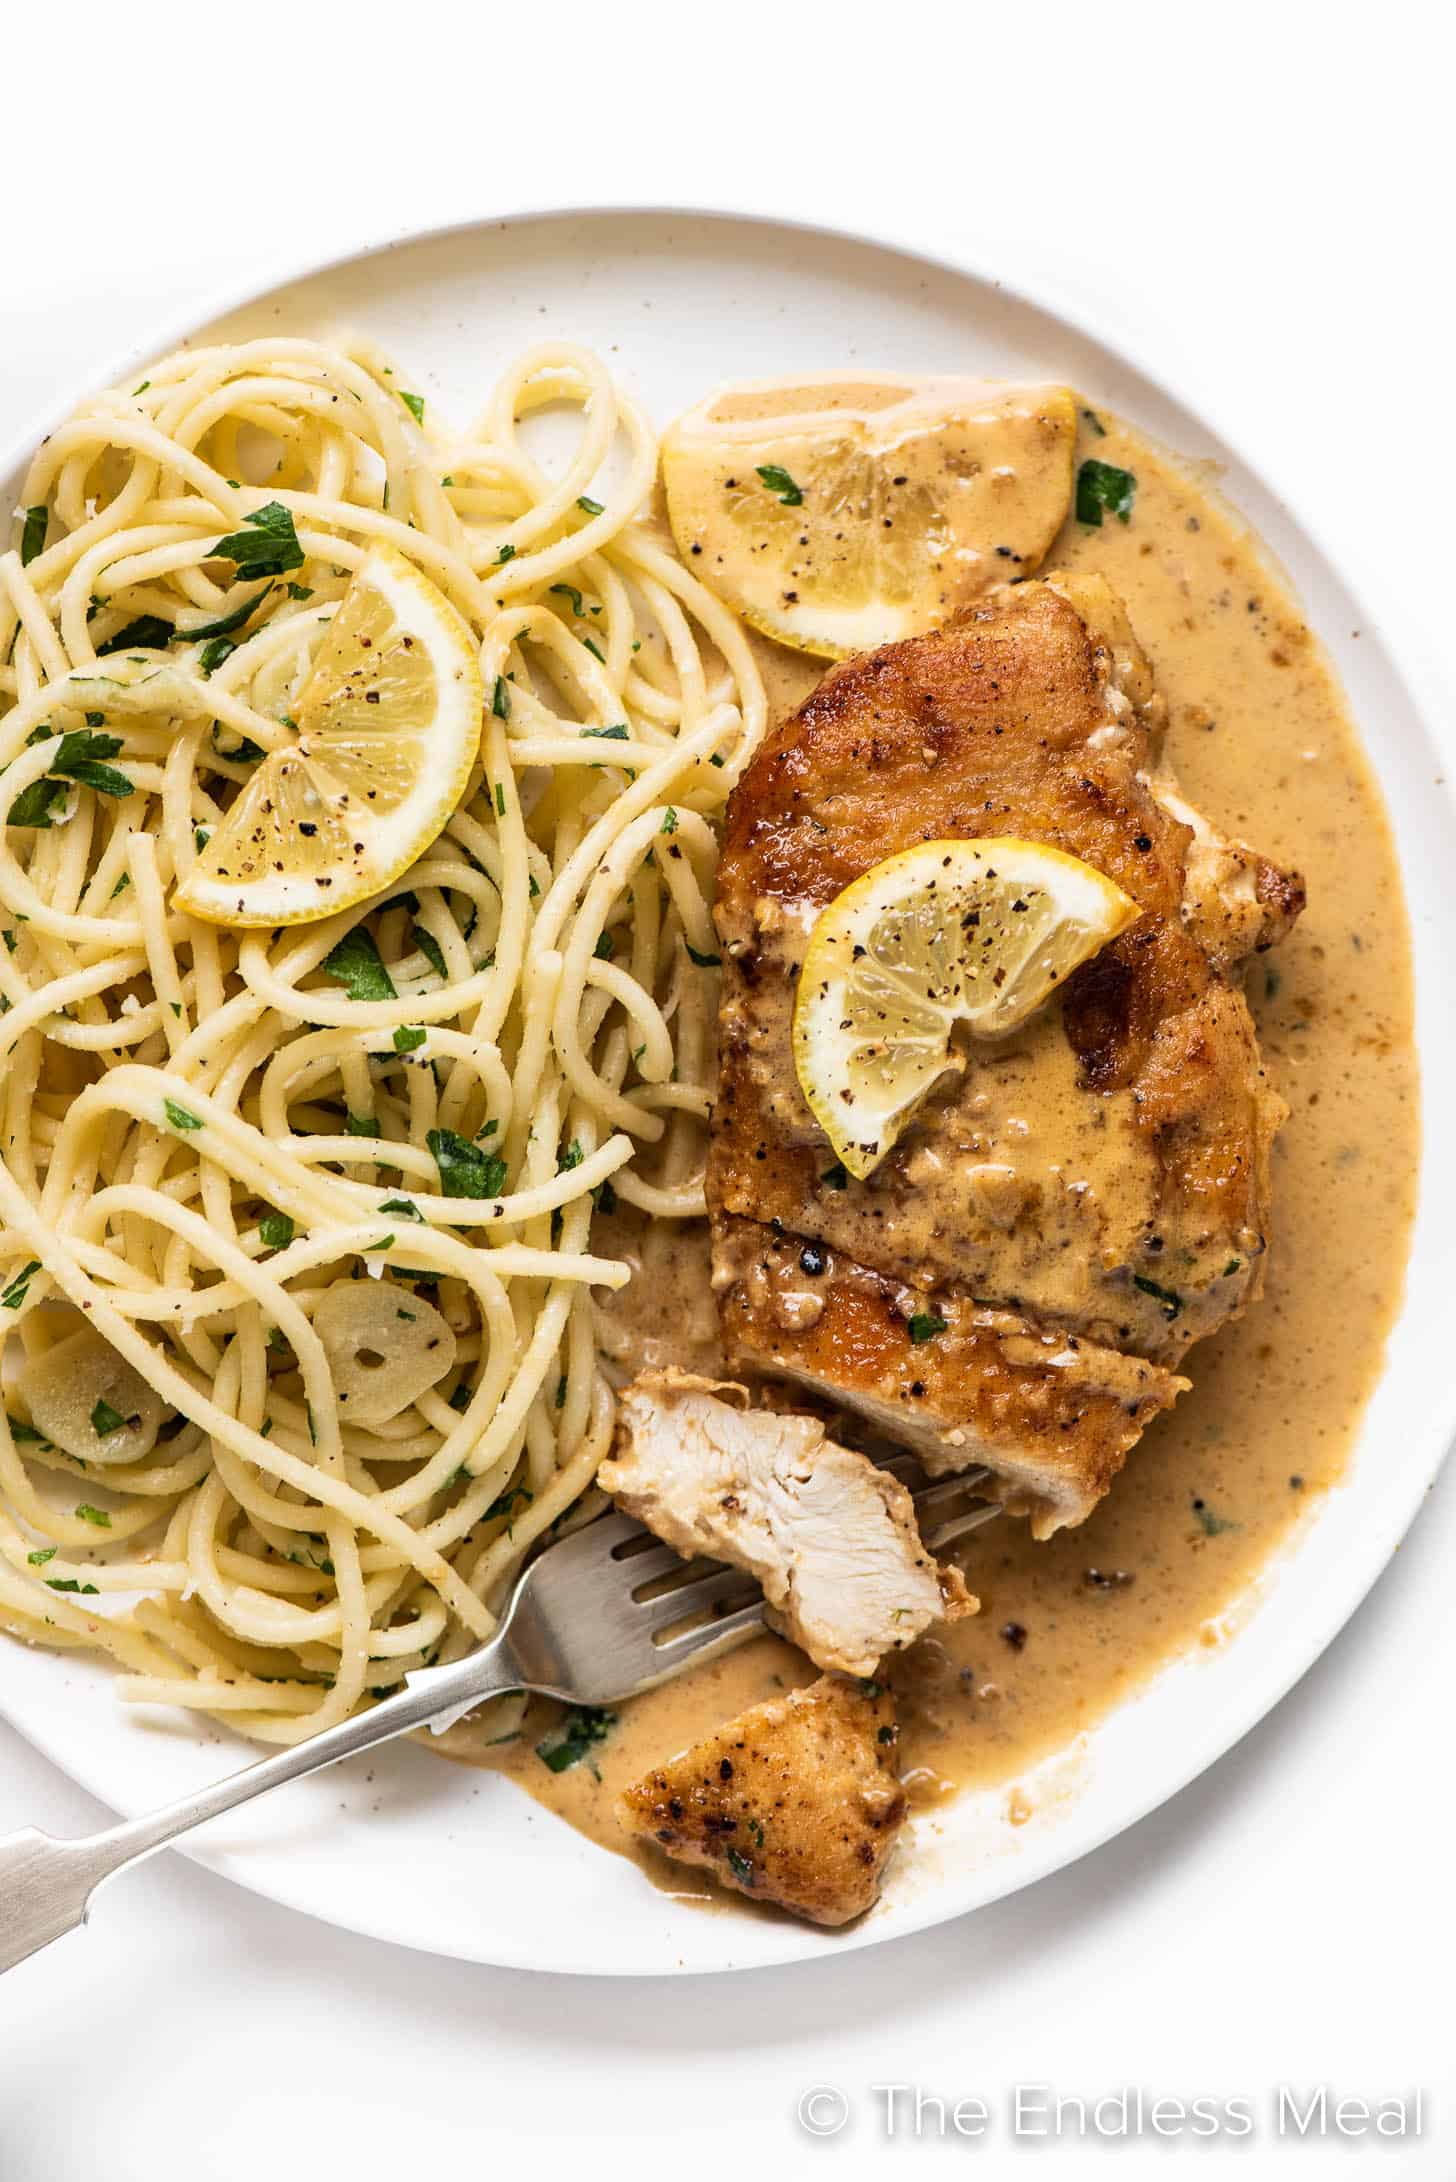 Lemon Pepper Chicken sliced on a plate with pasta covered in creamy sauce